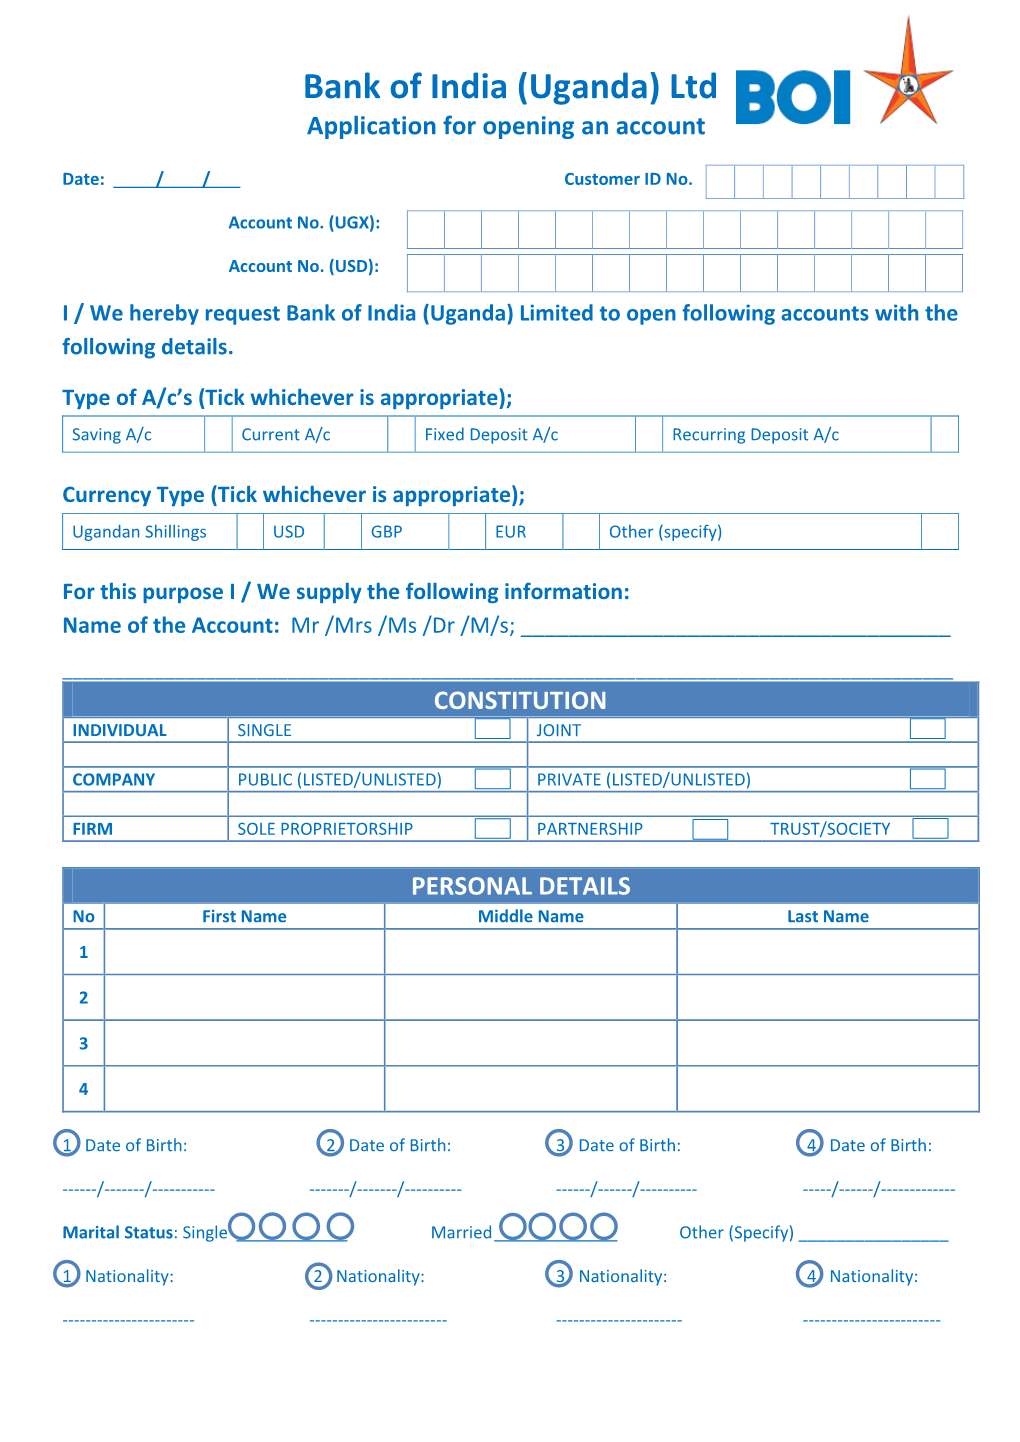 Bank of India (Uganda) Ltd Application for Opening an Account